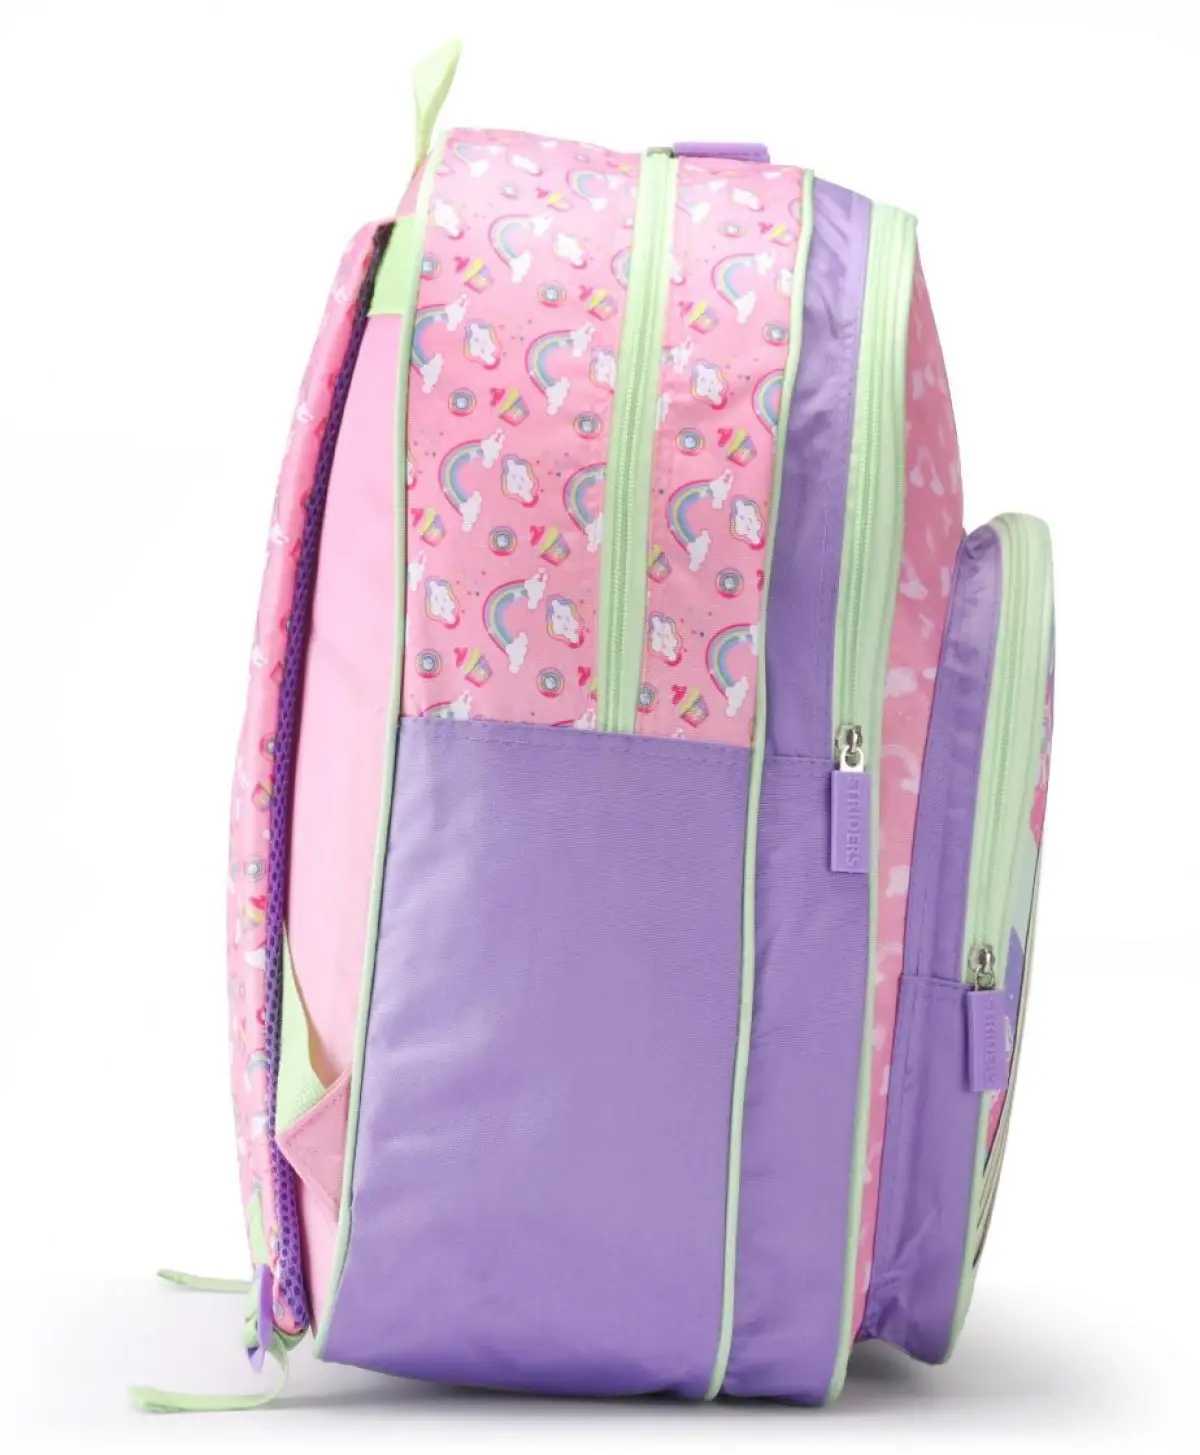 Striders 18 inches Barbie School Bag Dreams in Style for Little Fashionistas Multicolor For Kids Ages 8Y+